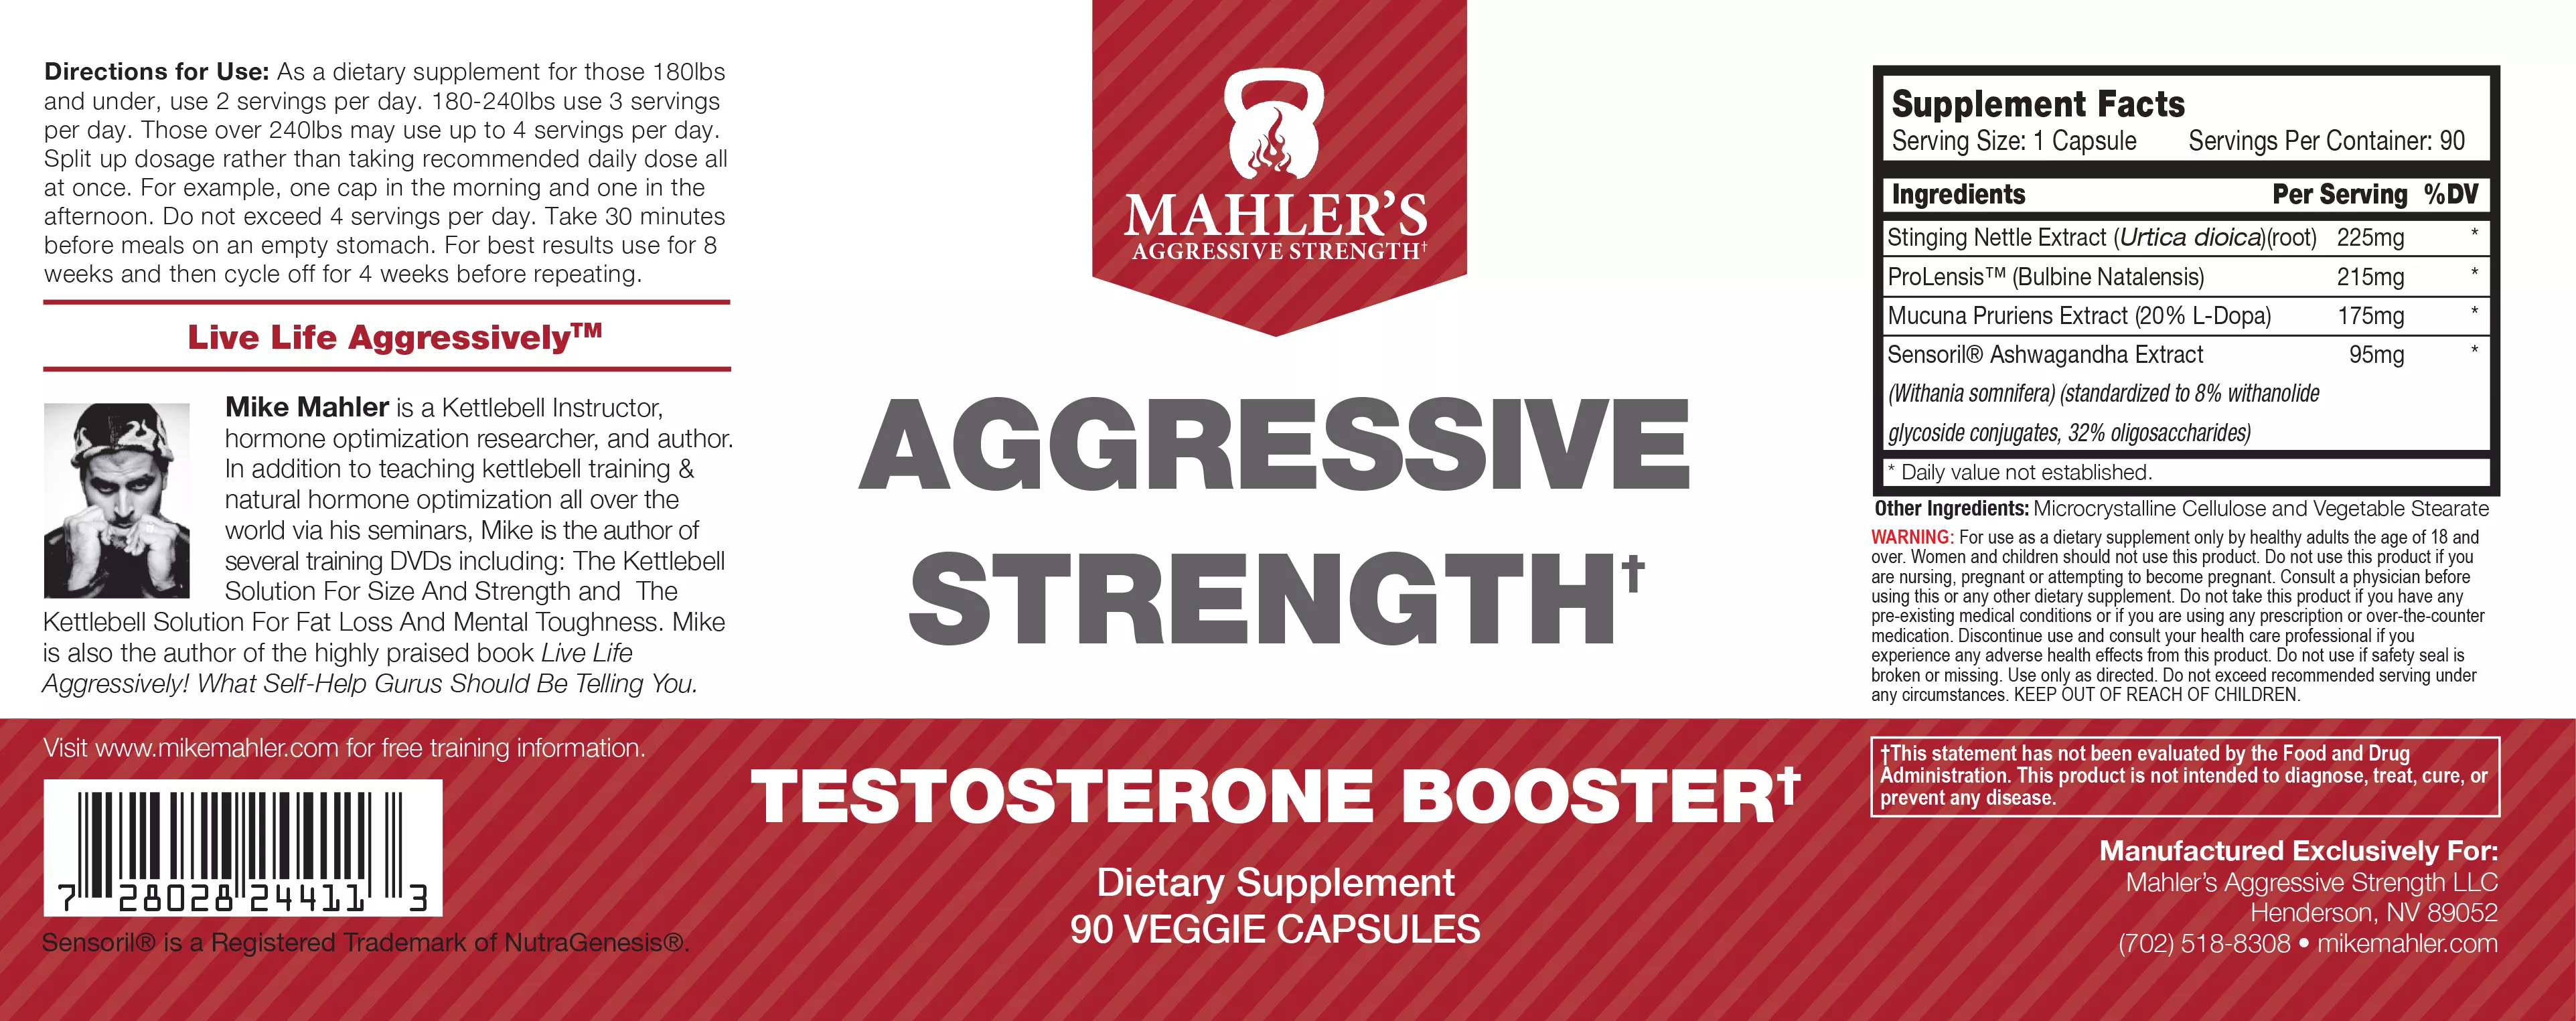 Mike Mahler's Aggressive Strength Label